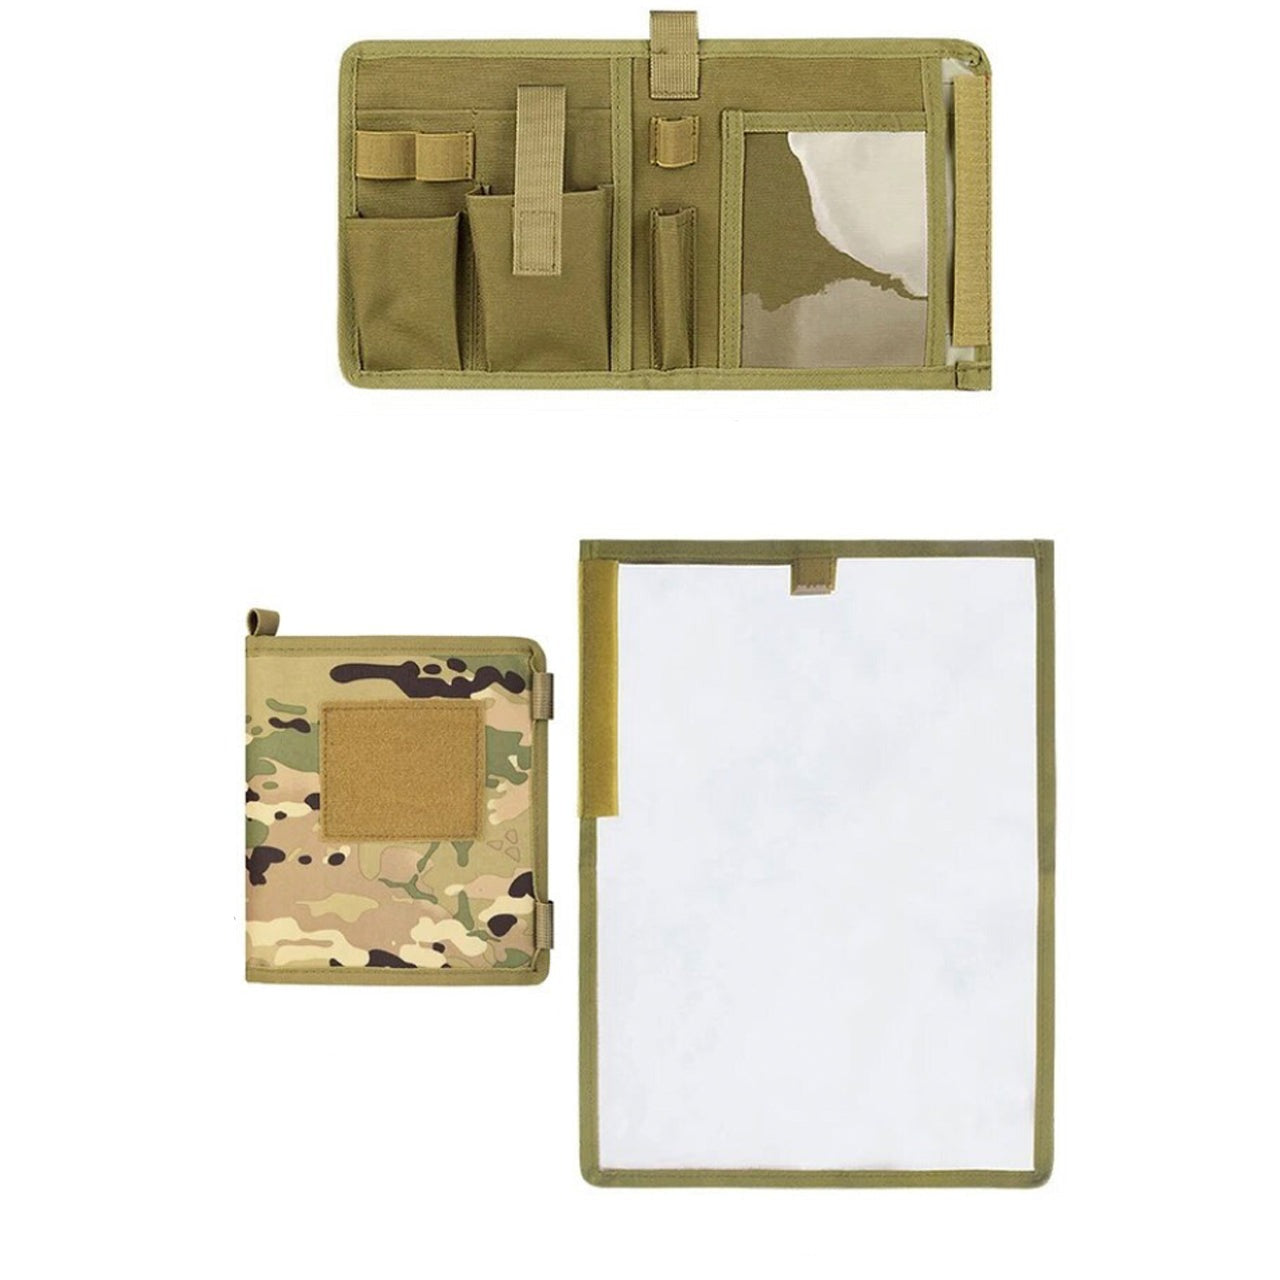 Discover this deluxe field administration case boasting features like a removable map protector, full-length rear document pocket, and storage for your maps, compass, and other admin tools. www.moralepatches.com.au notebook cover broken down into map, folded and open